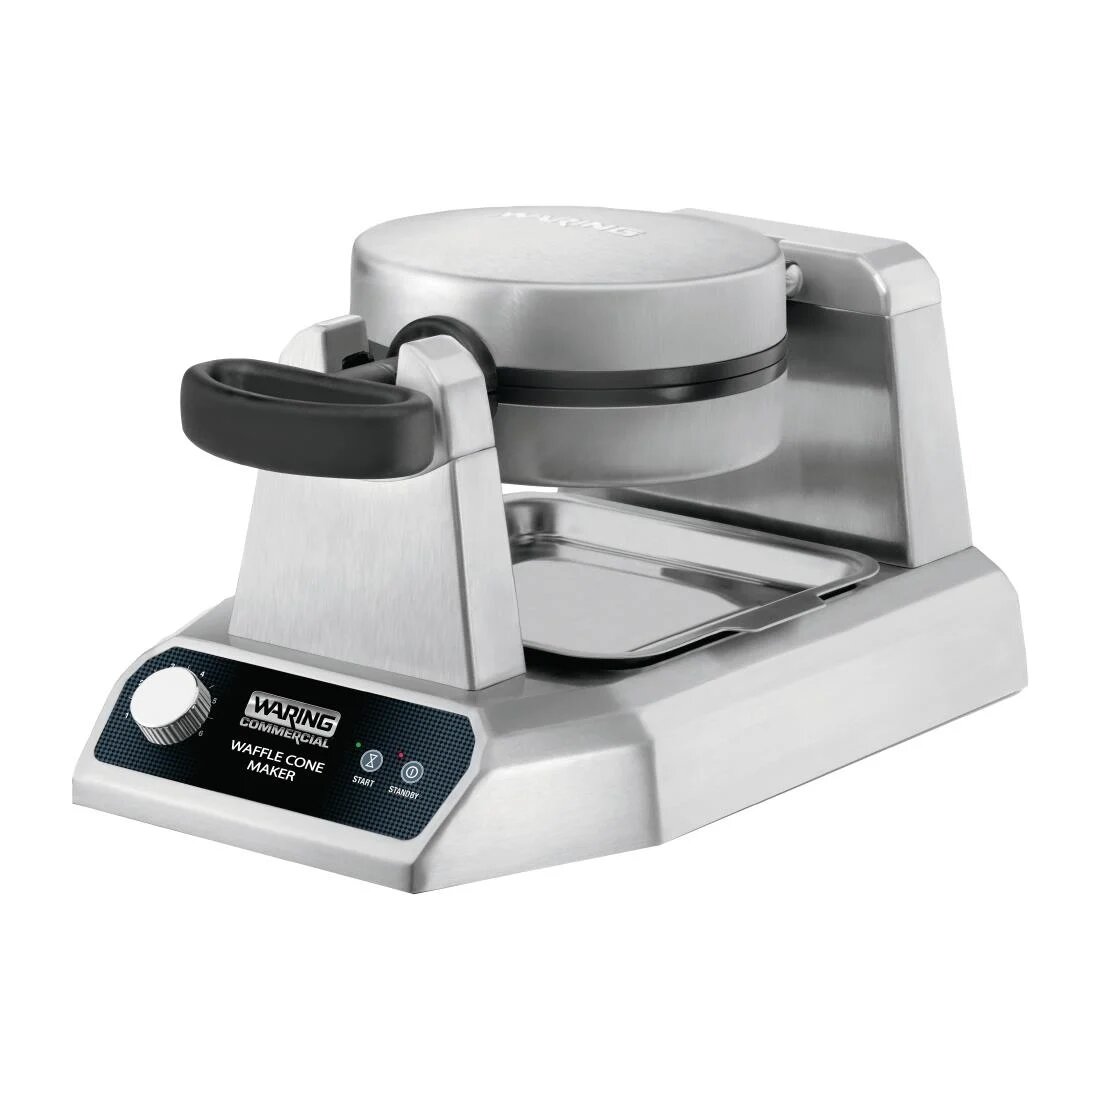 Waring CH575 - Commercial Single Waffle Cone Maker 53 Cones per hour